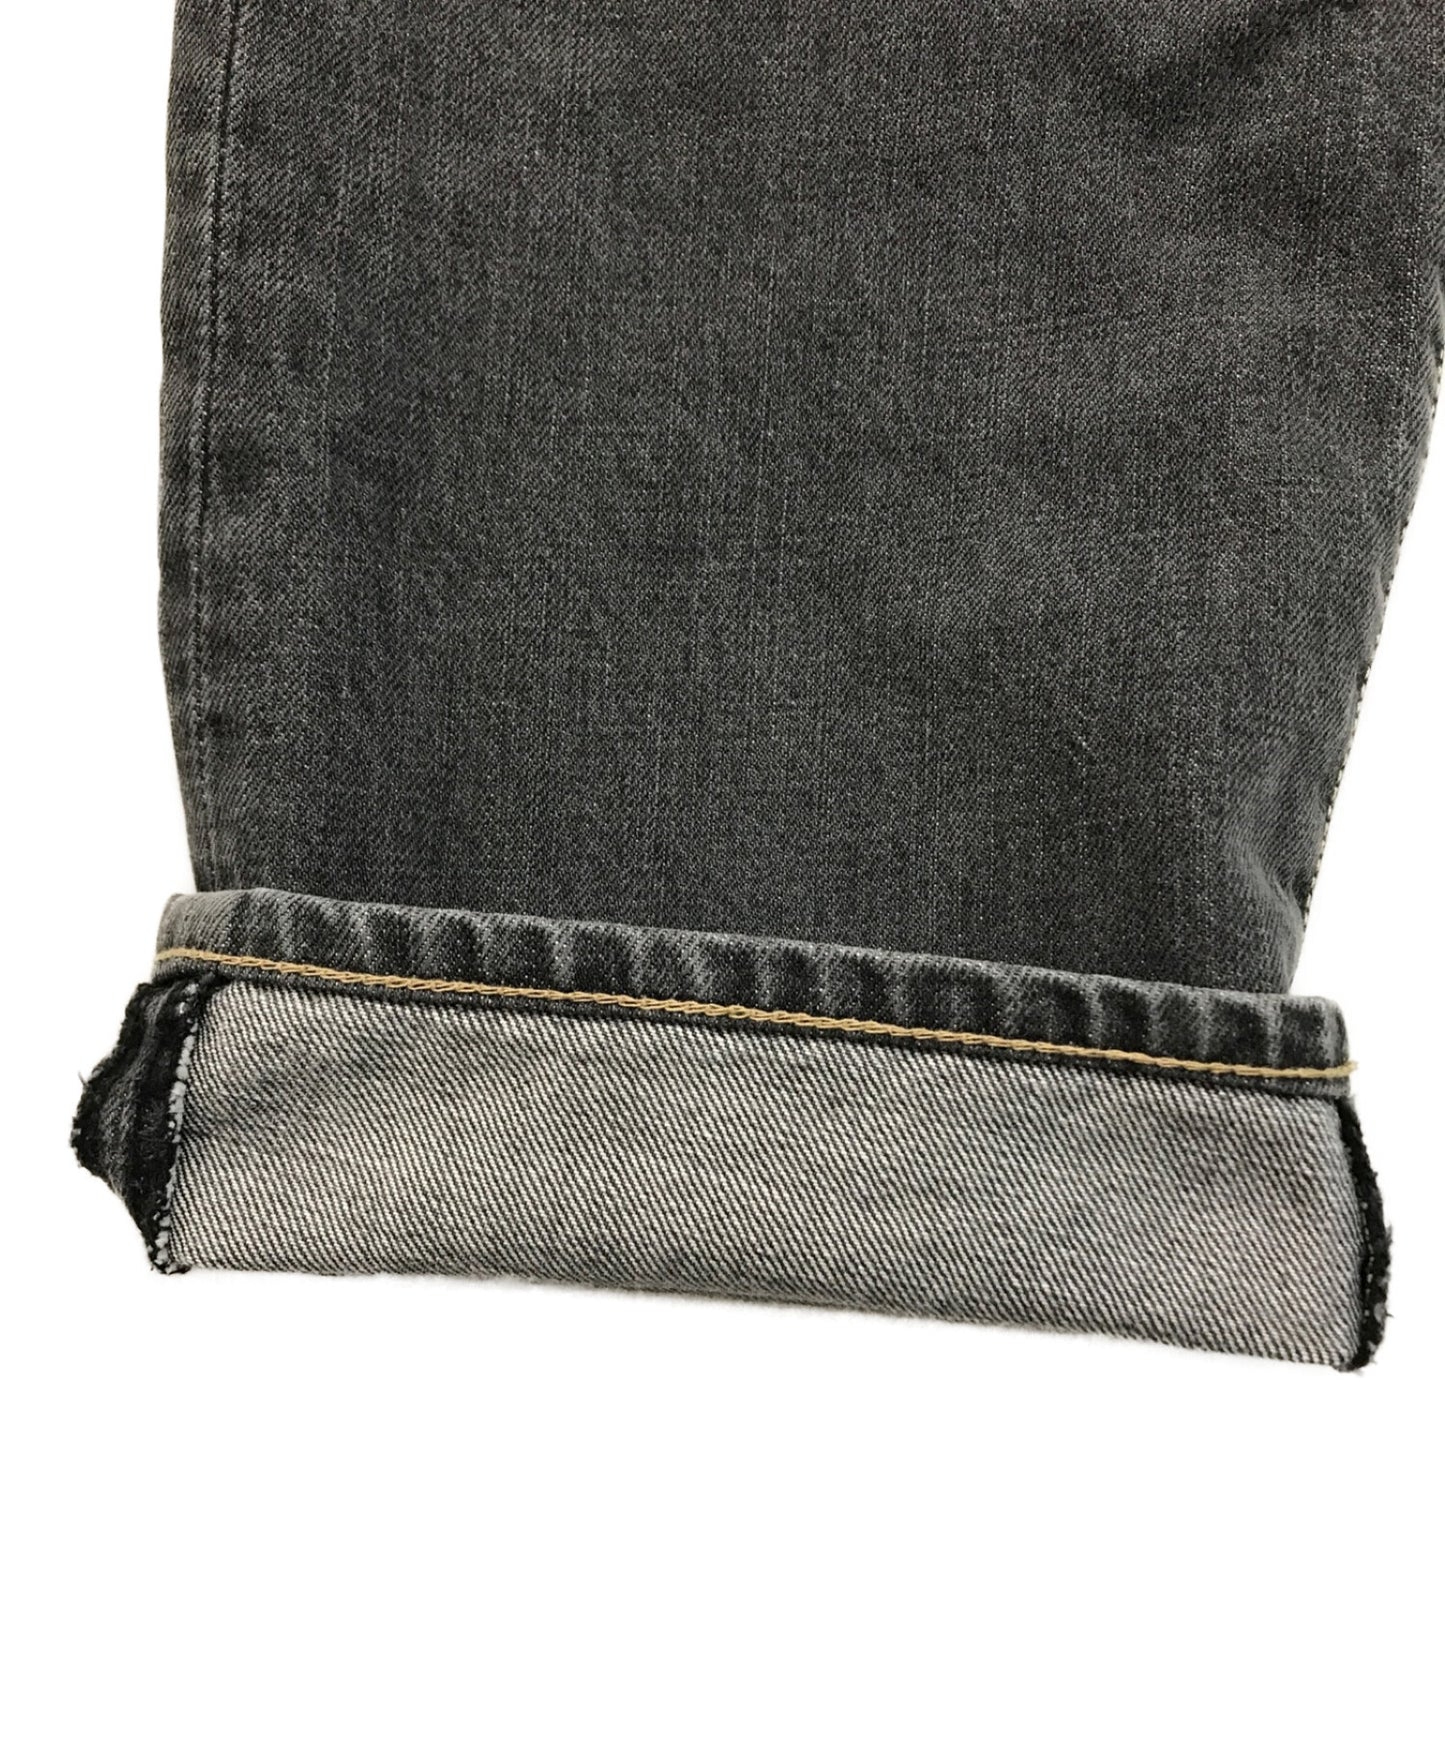 [Pre-owned] WTAPS BLUES BAGGY 02 212wvdt-ptm06